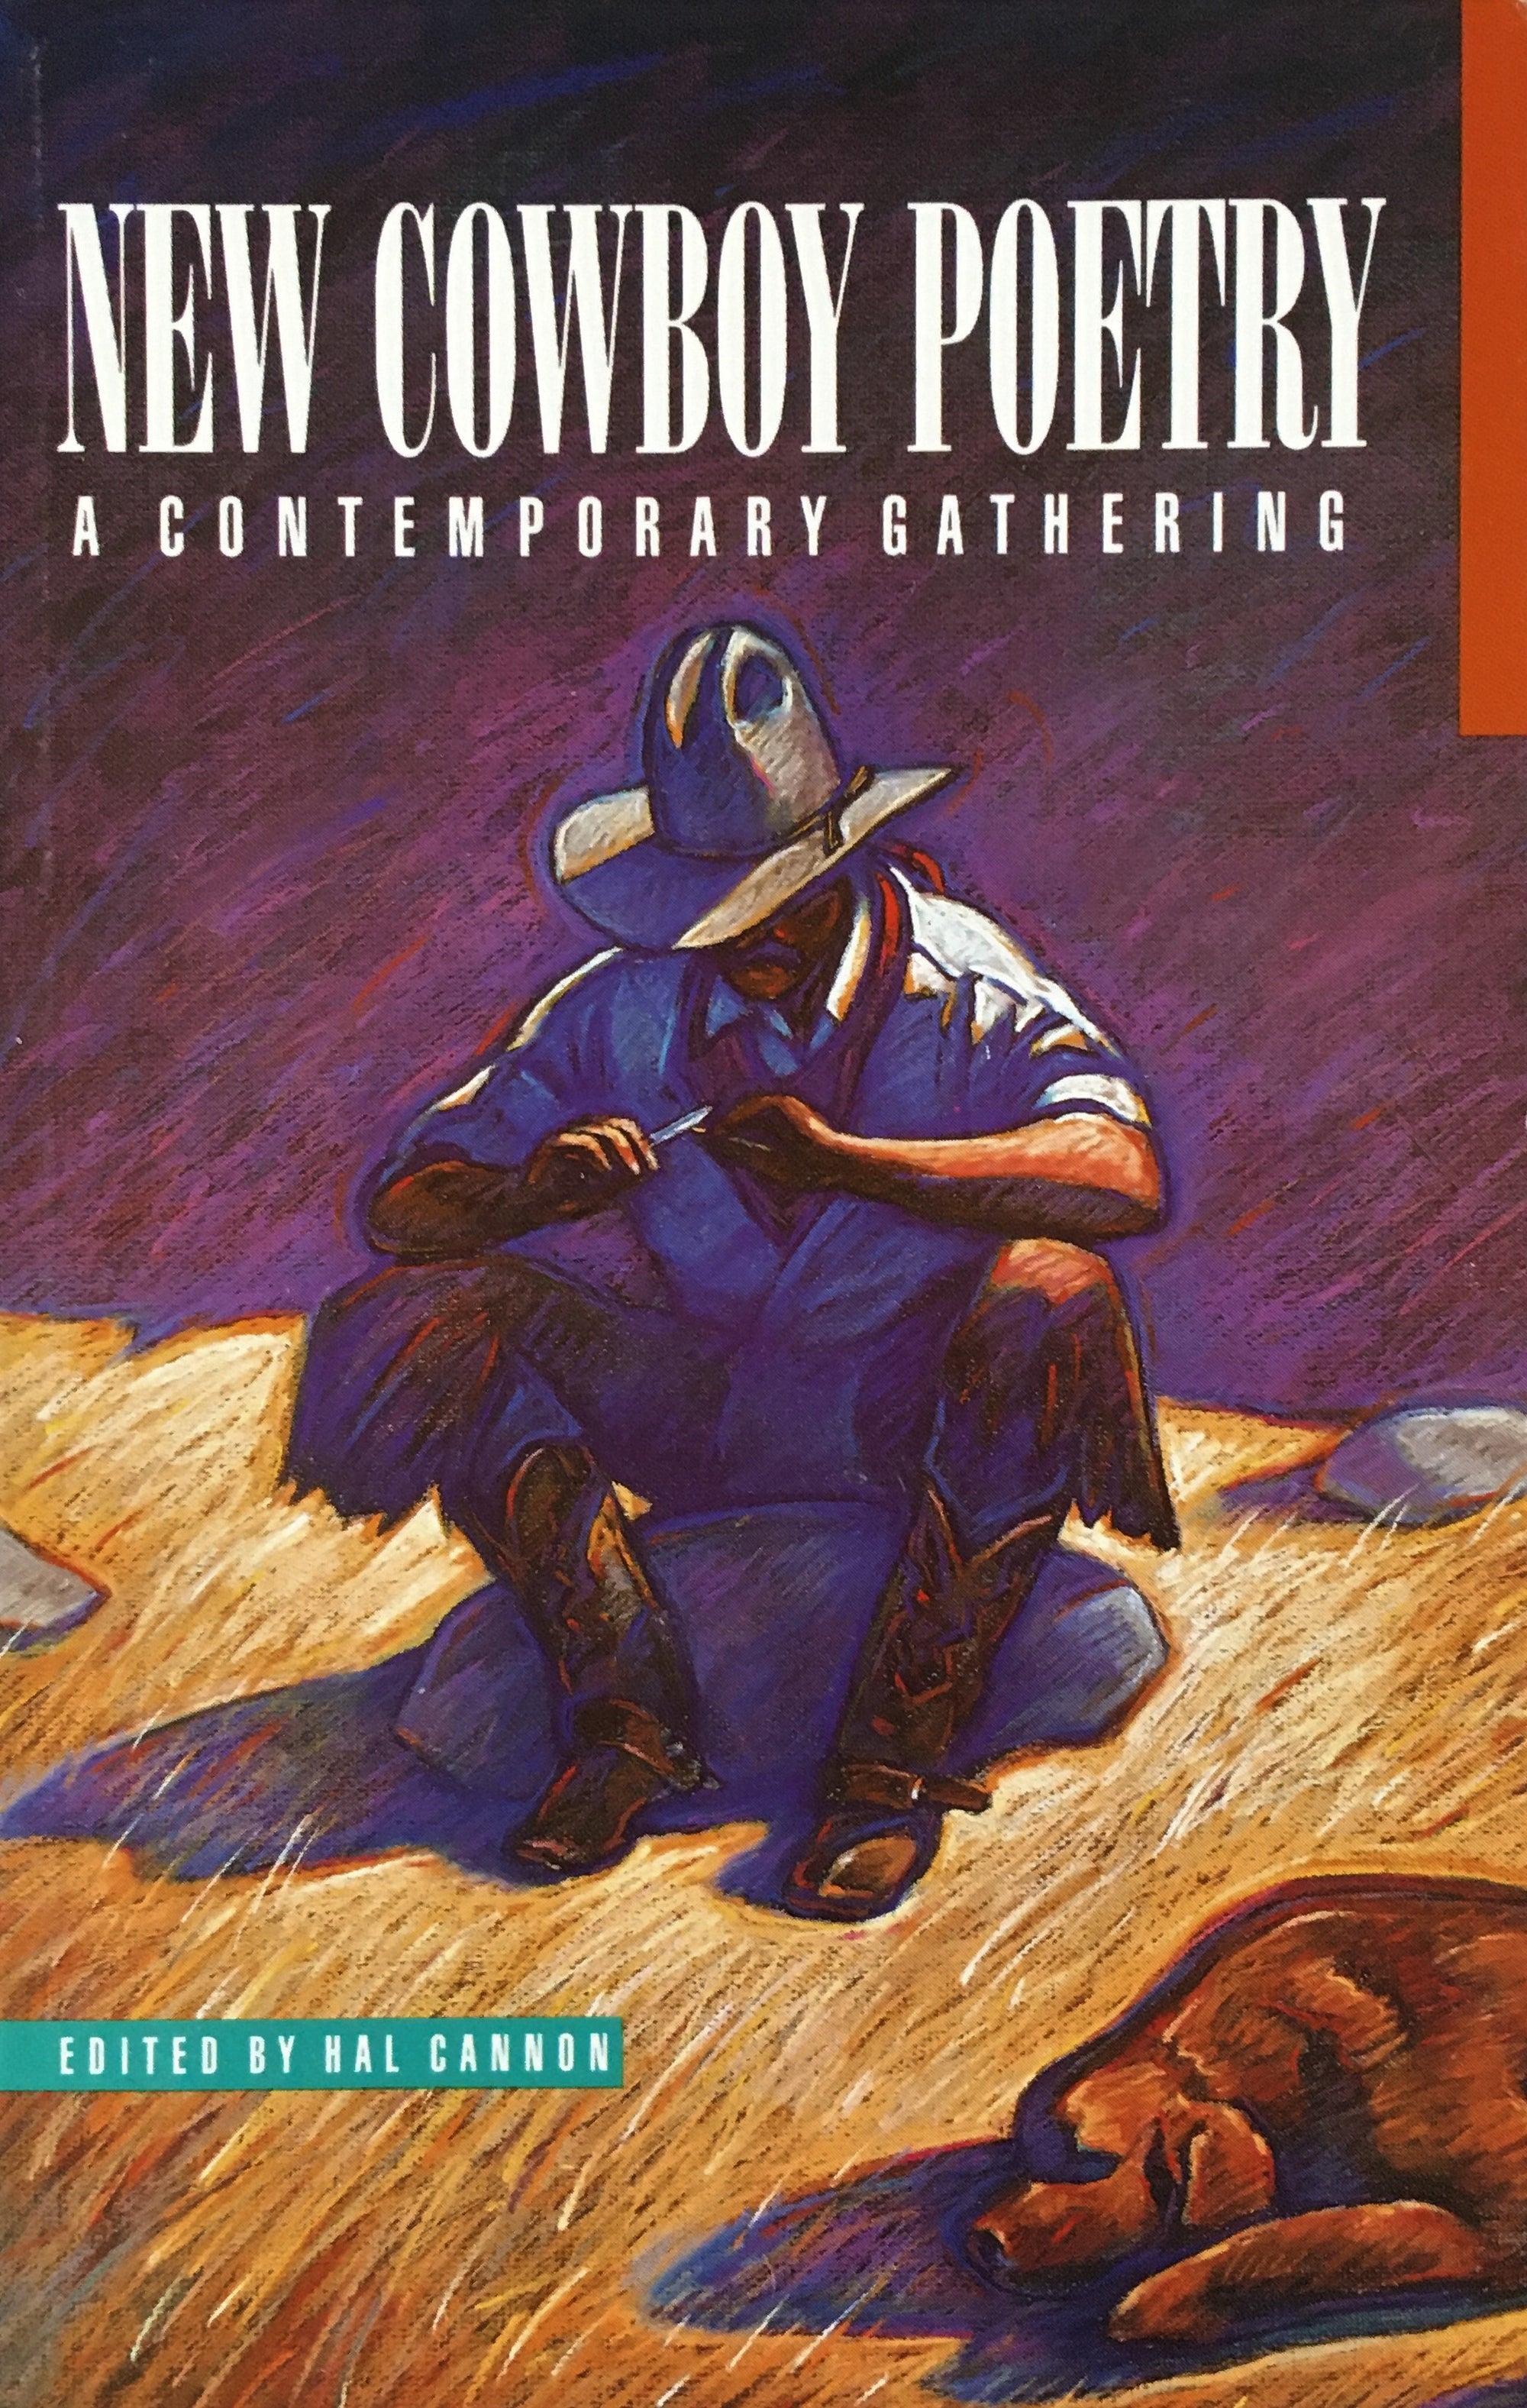 New Cowboy Poetry A Contemporary Gathering Edited by Hal Cannon Book Cover